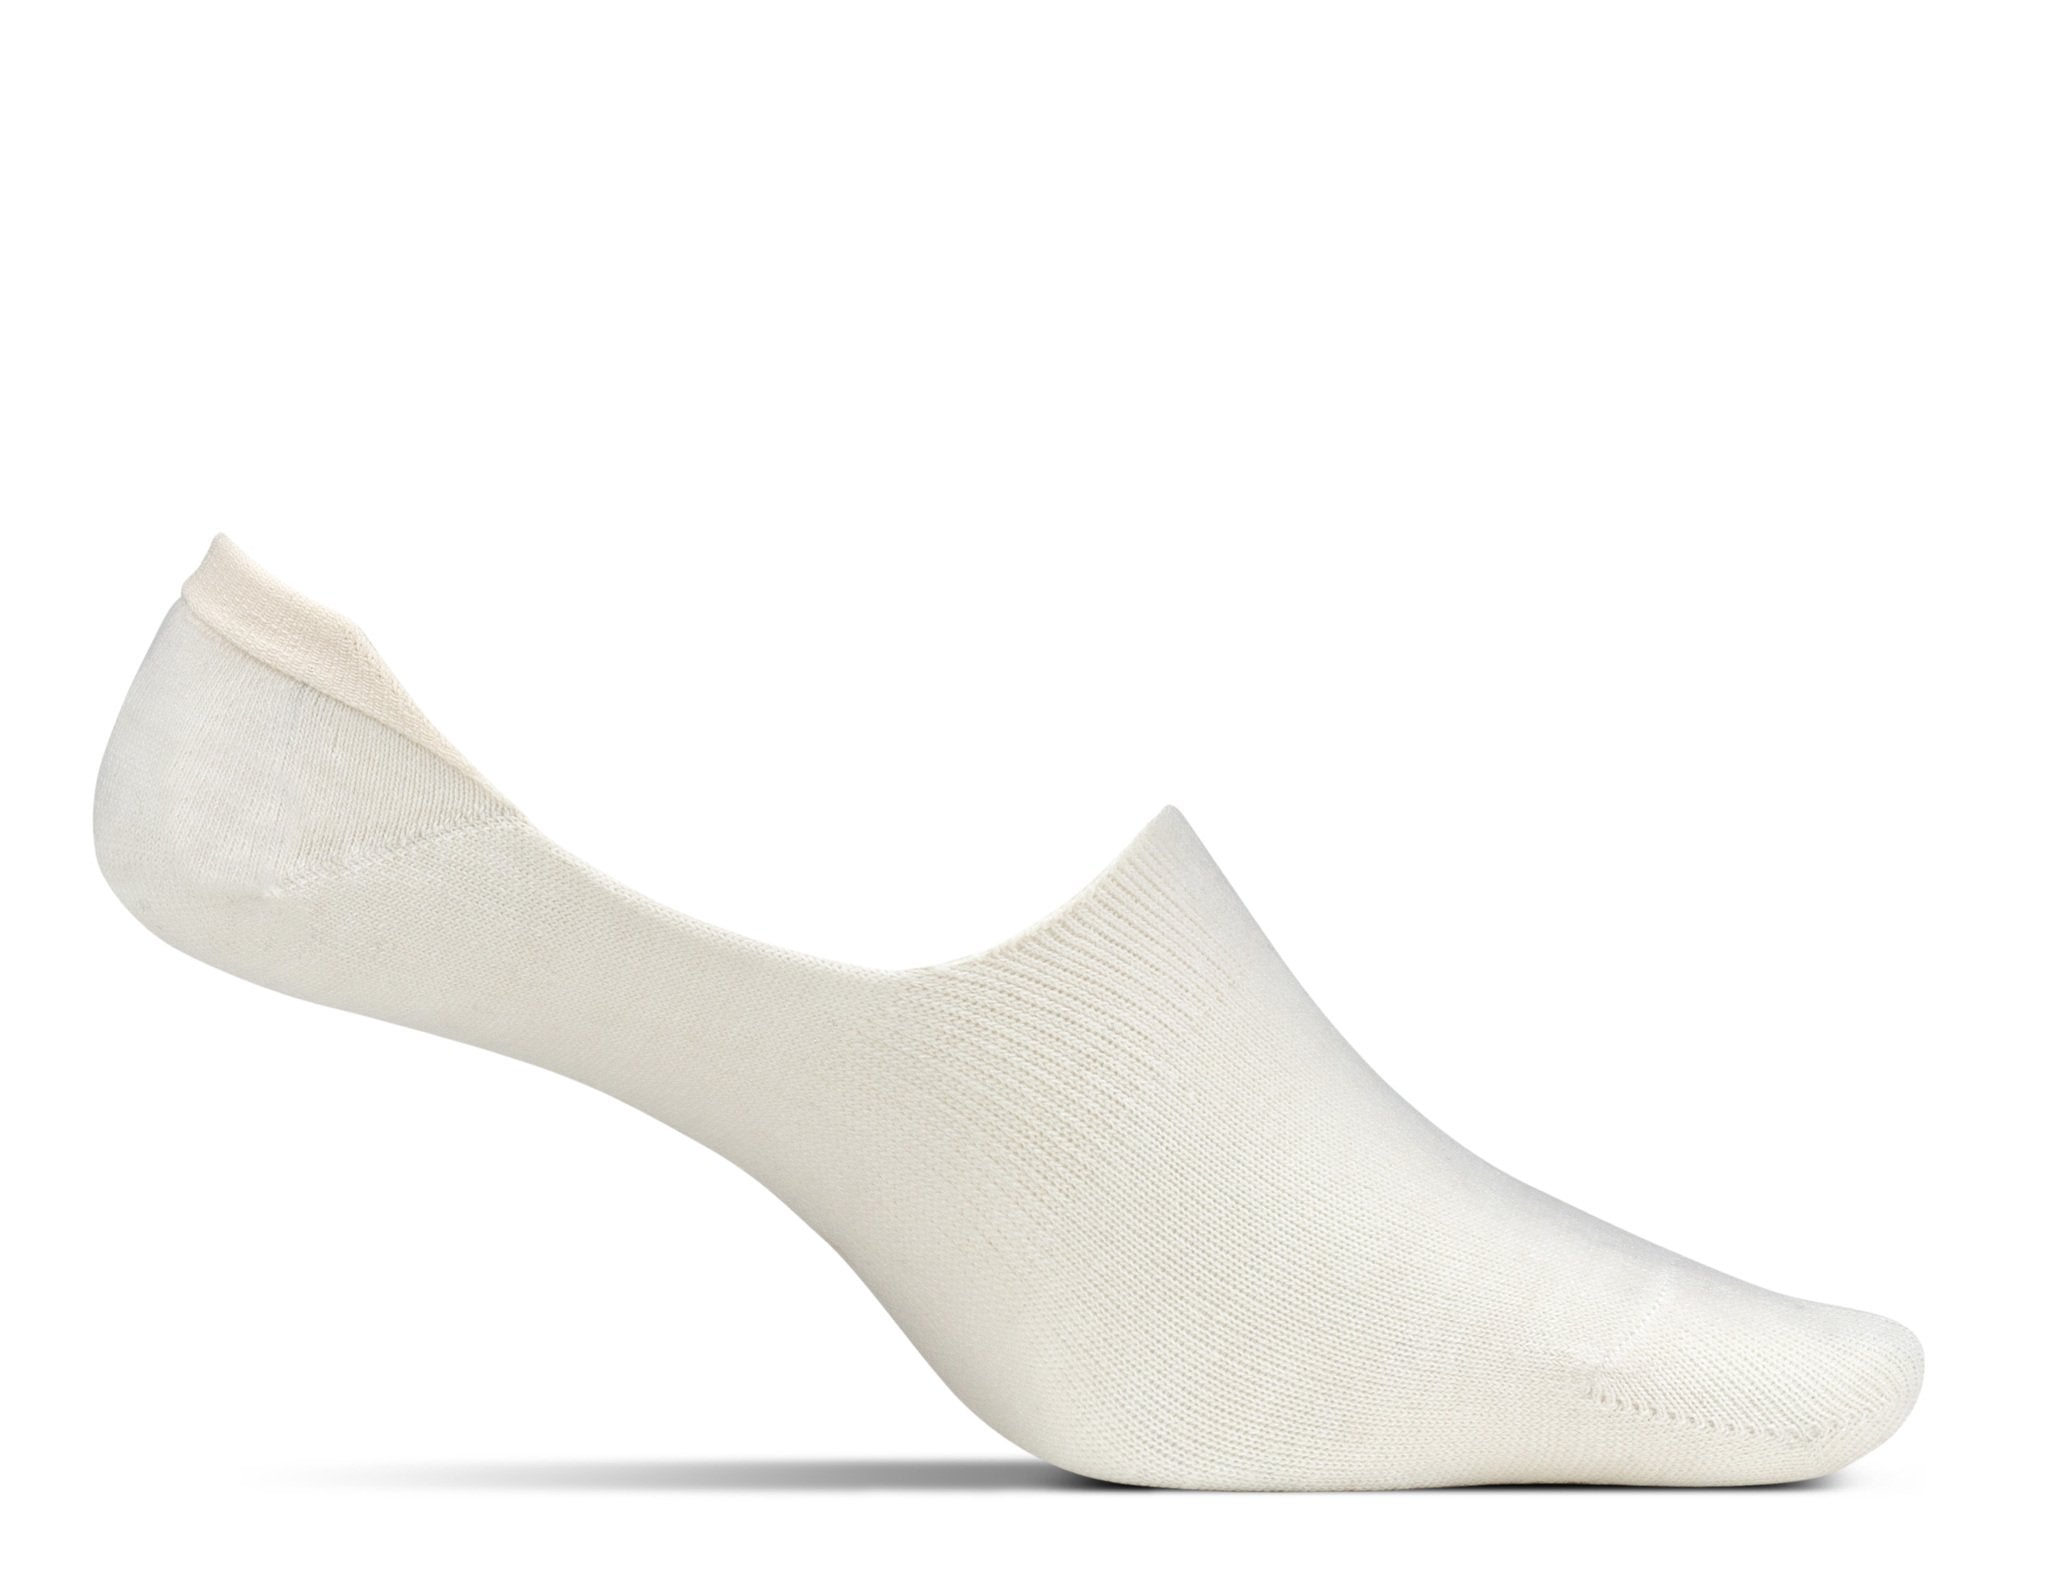 Medial view of the Feetures Women's Hidden Sock in the color Natural